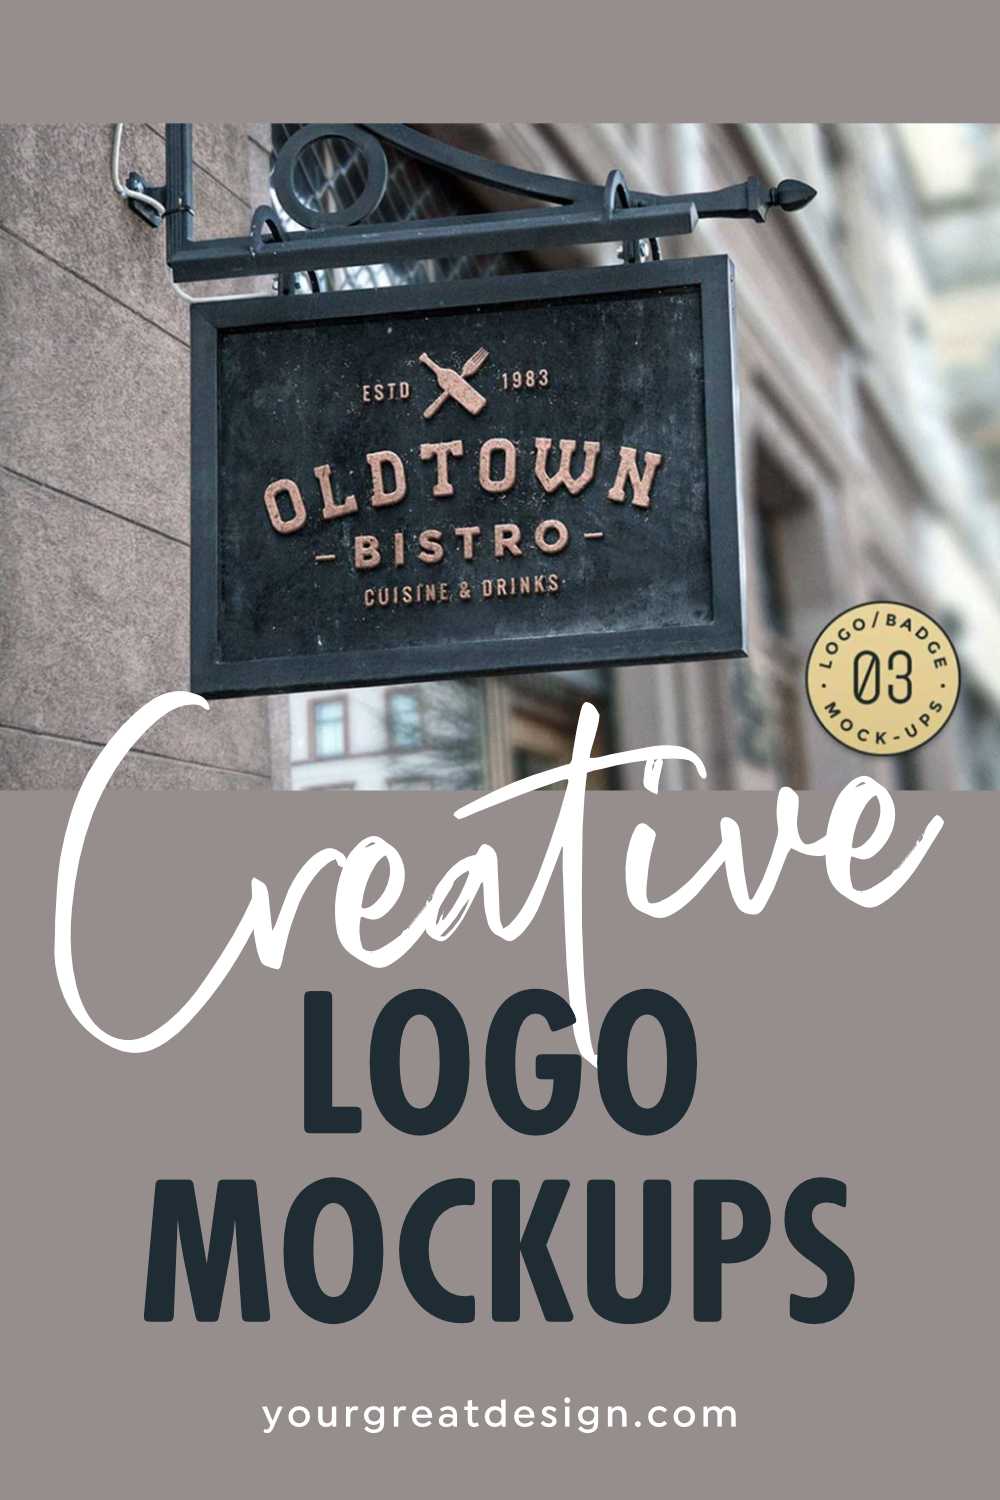 Creative Logo Mockups to use when proposing a logo - for crowdsourcing projects and creating portfolio images Also available